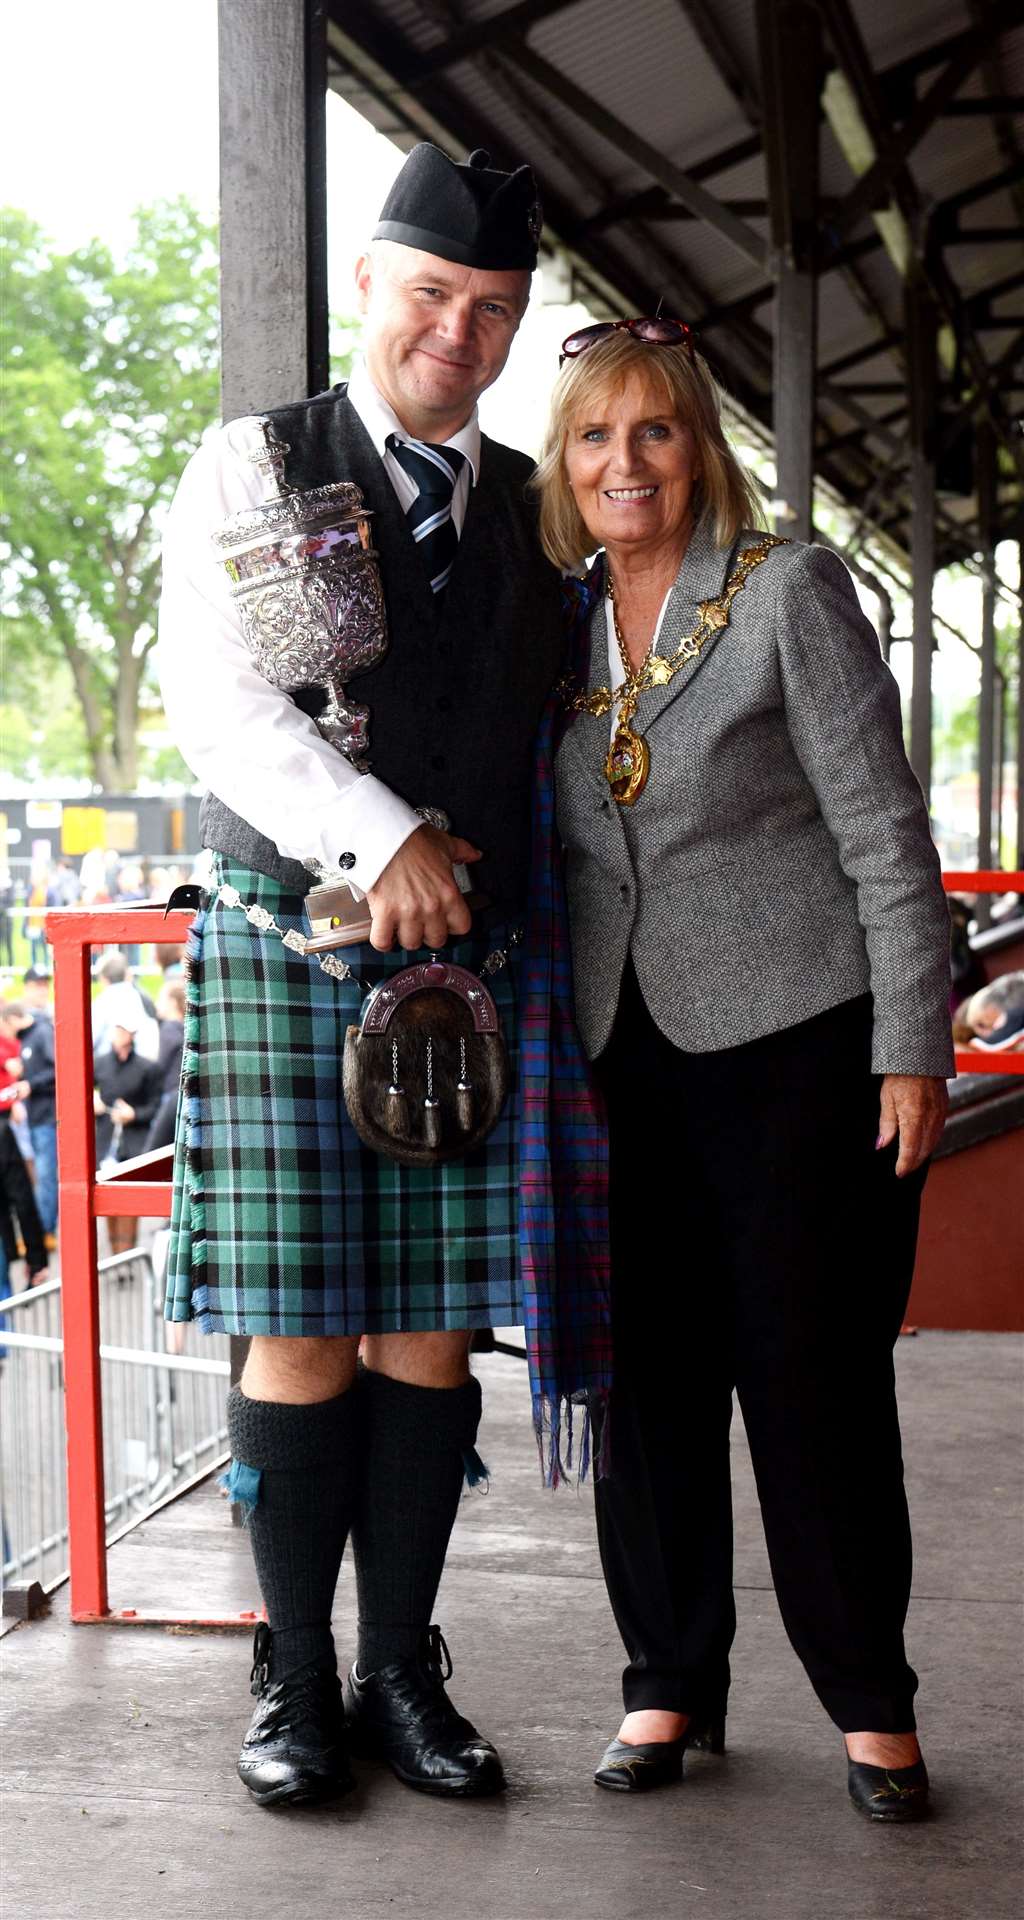 Pipe Major Stuart Liddle of Inveraray and District Pipe Band winners of the grade 1 trophy 2019 presented by Provost Helen Carmichael European Pipe Band Championships Chieftain. Picture: Alasdair Allen